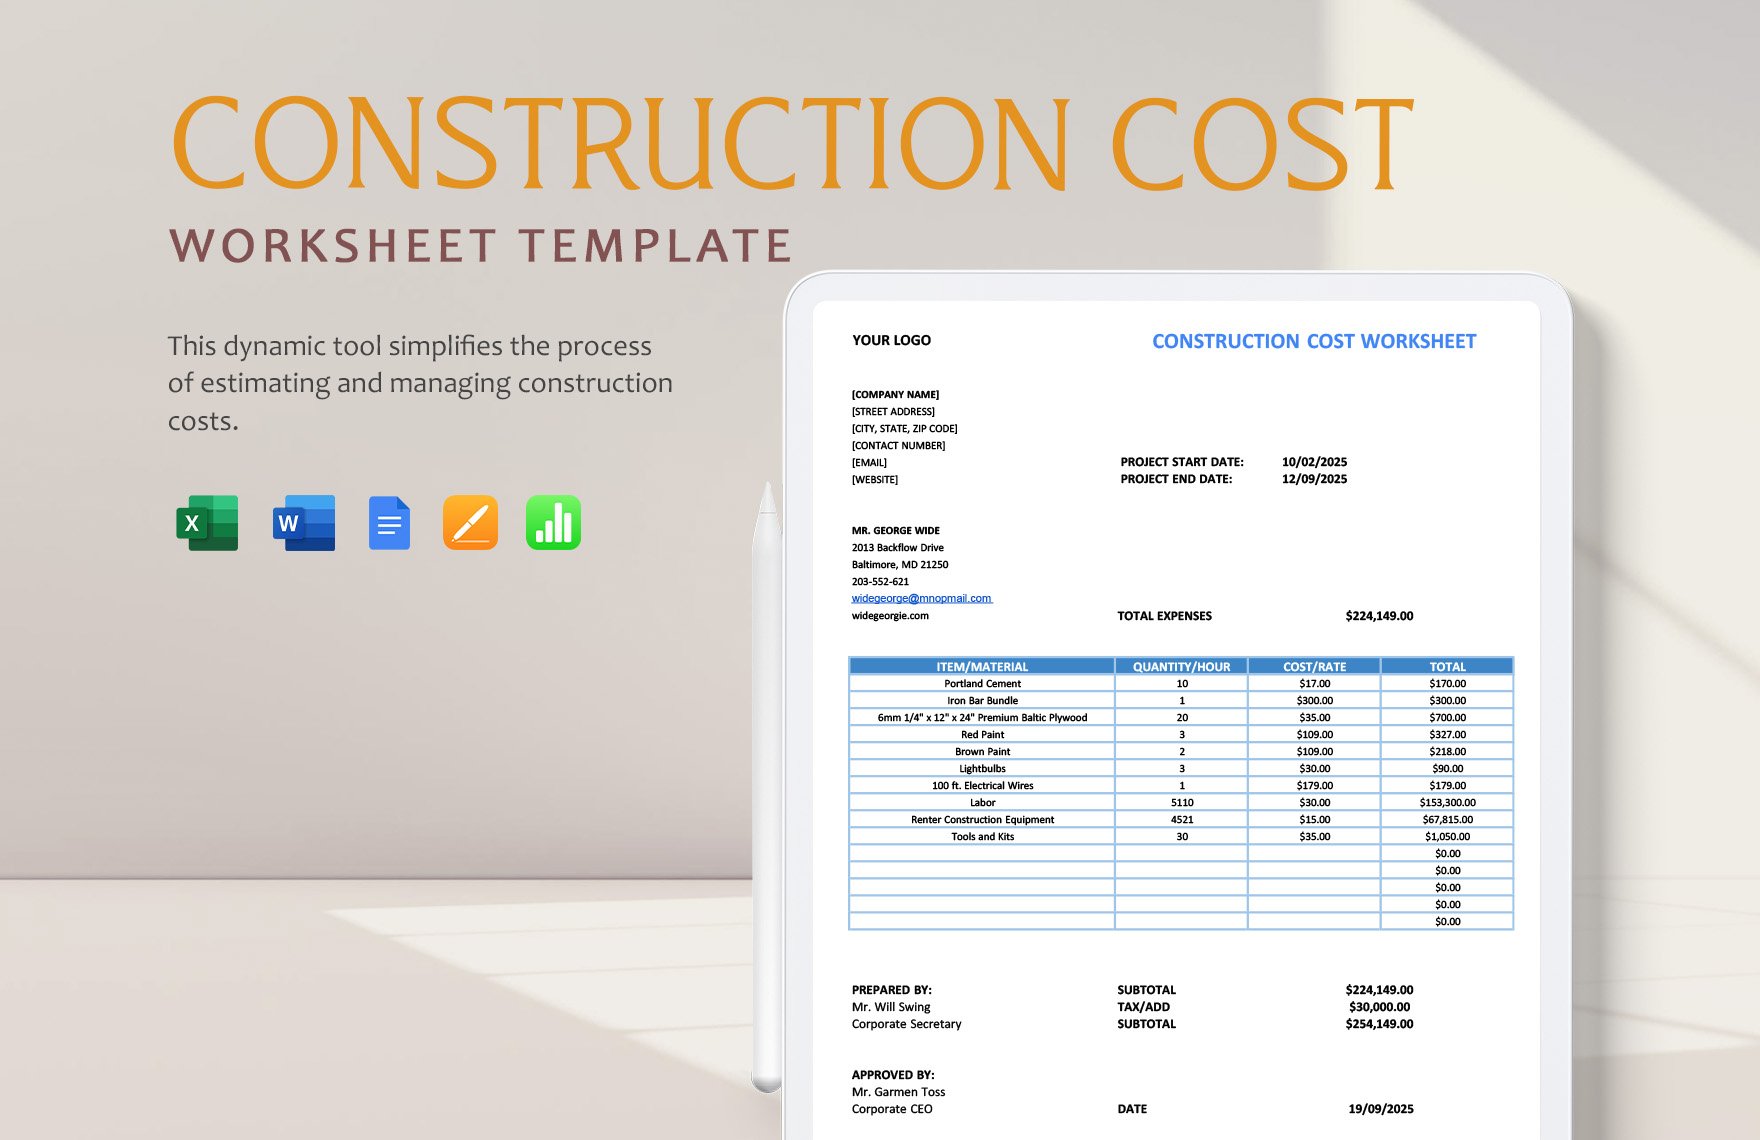 Construction Cost Worksheet Template in Word, Google Docs, Excel, Apple Pages, Apple Numbers